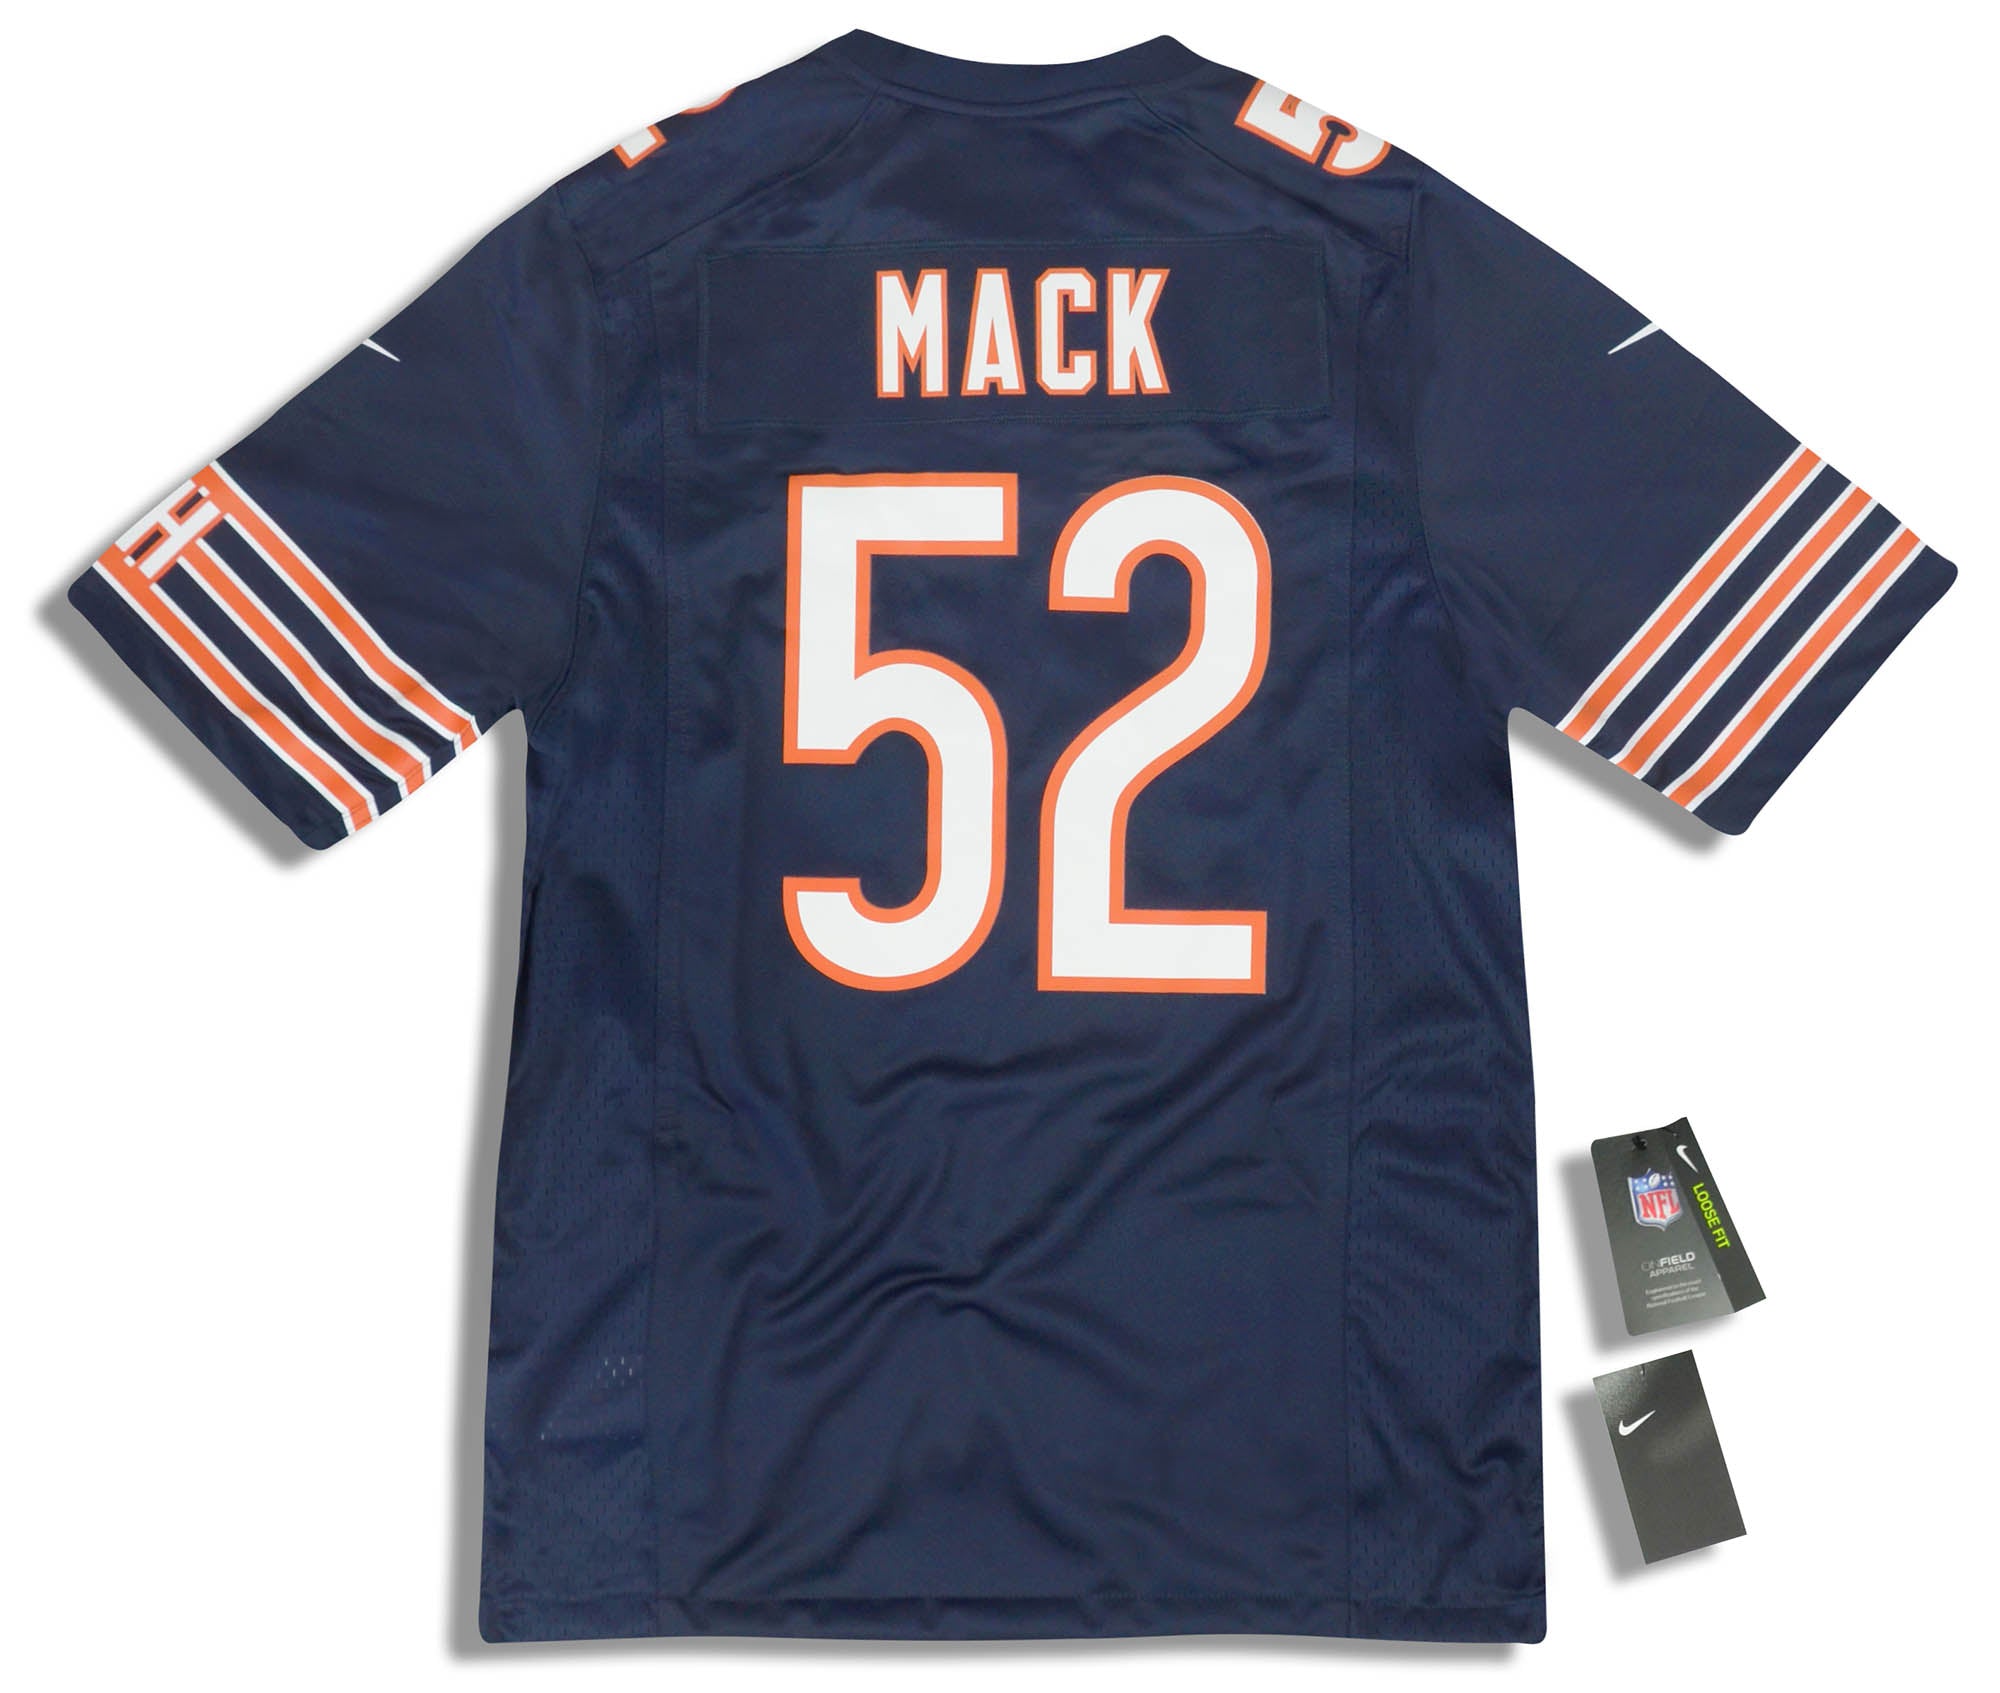 2018-19 CHICAGO BEARS MACK #52 NIKE GAME JERSEY (HOME) S - W/TAGS